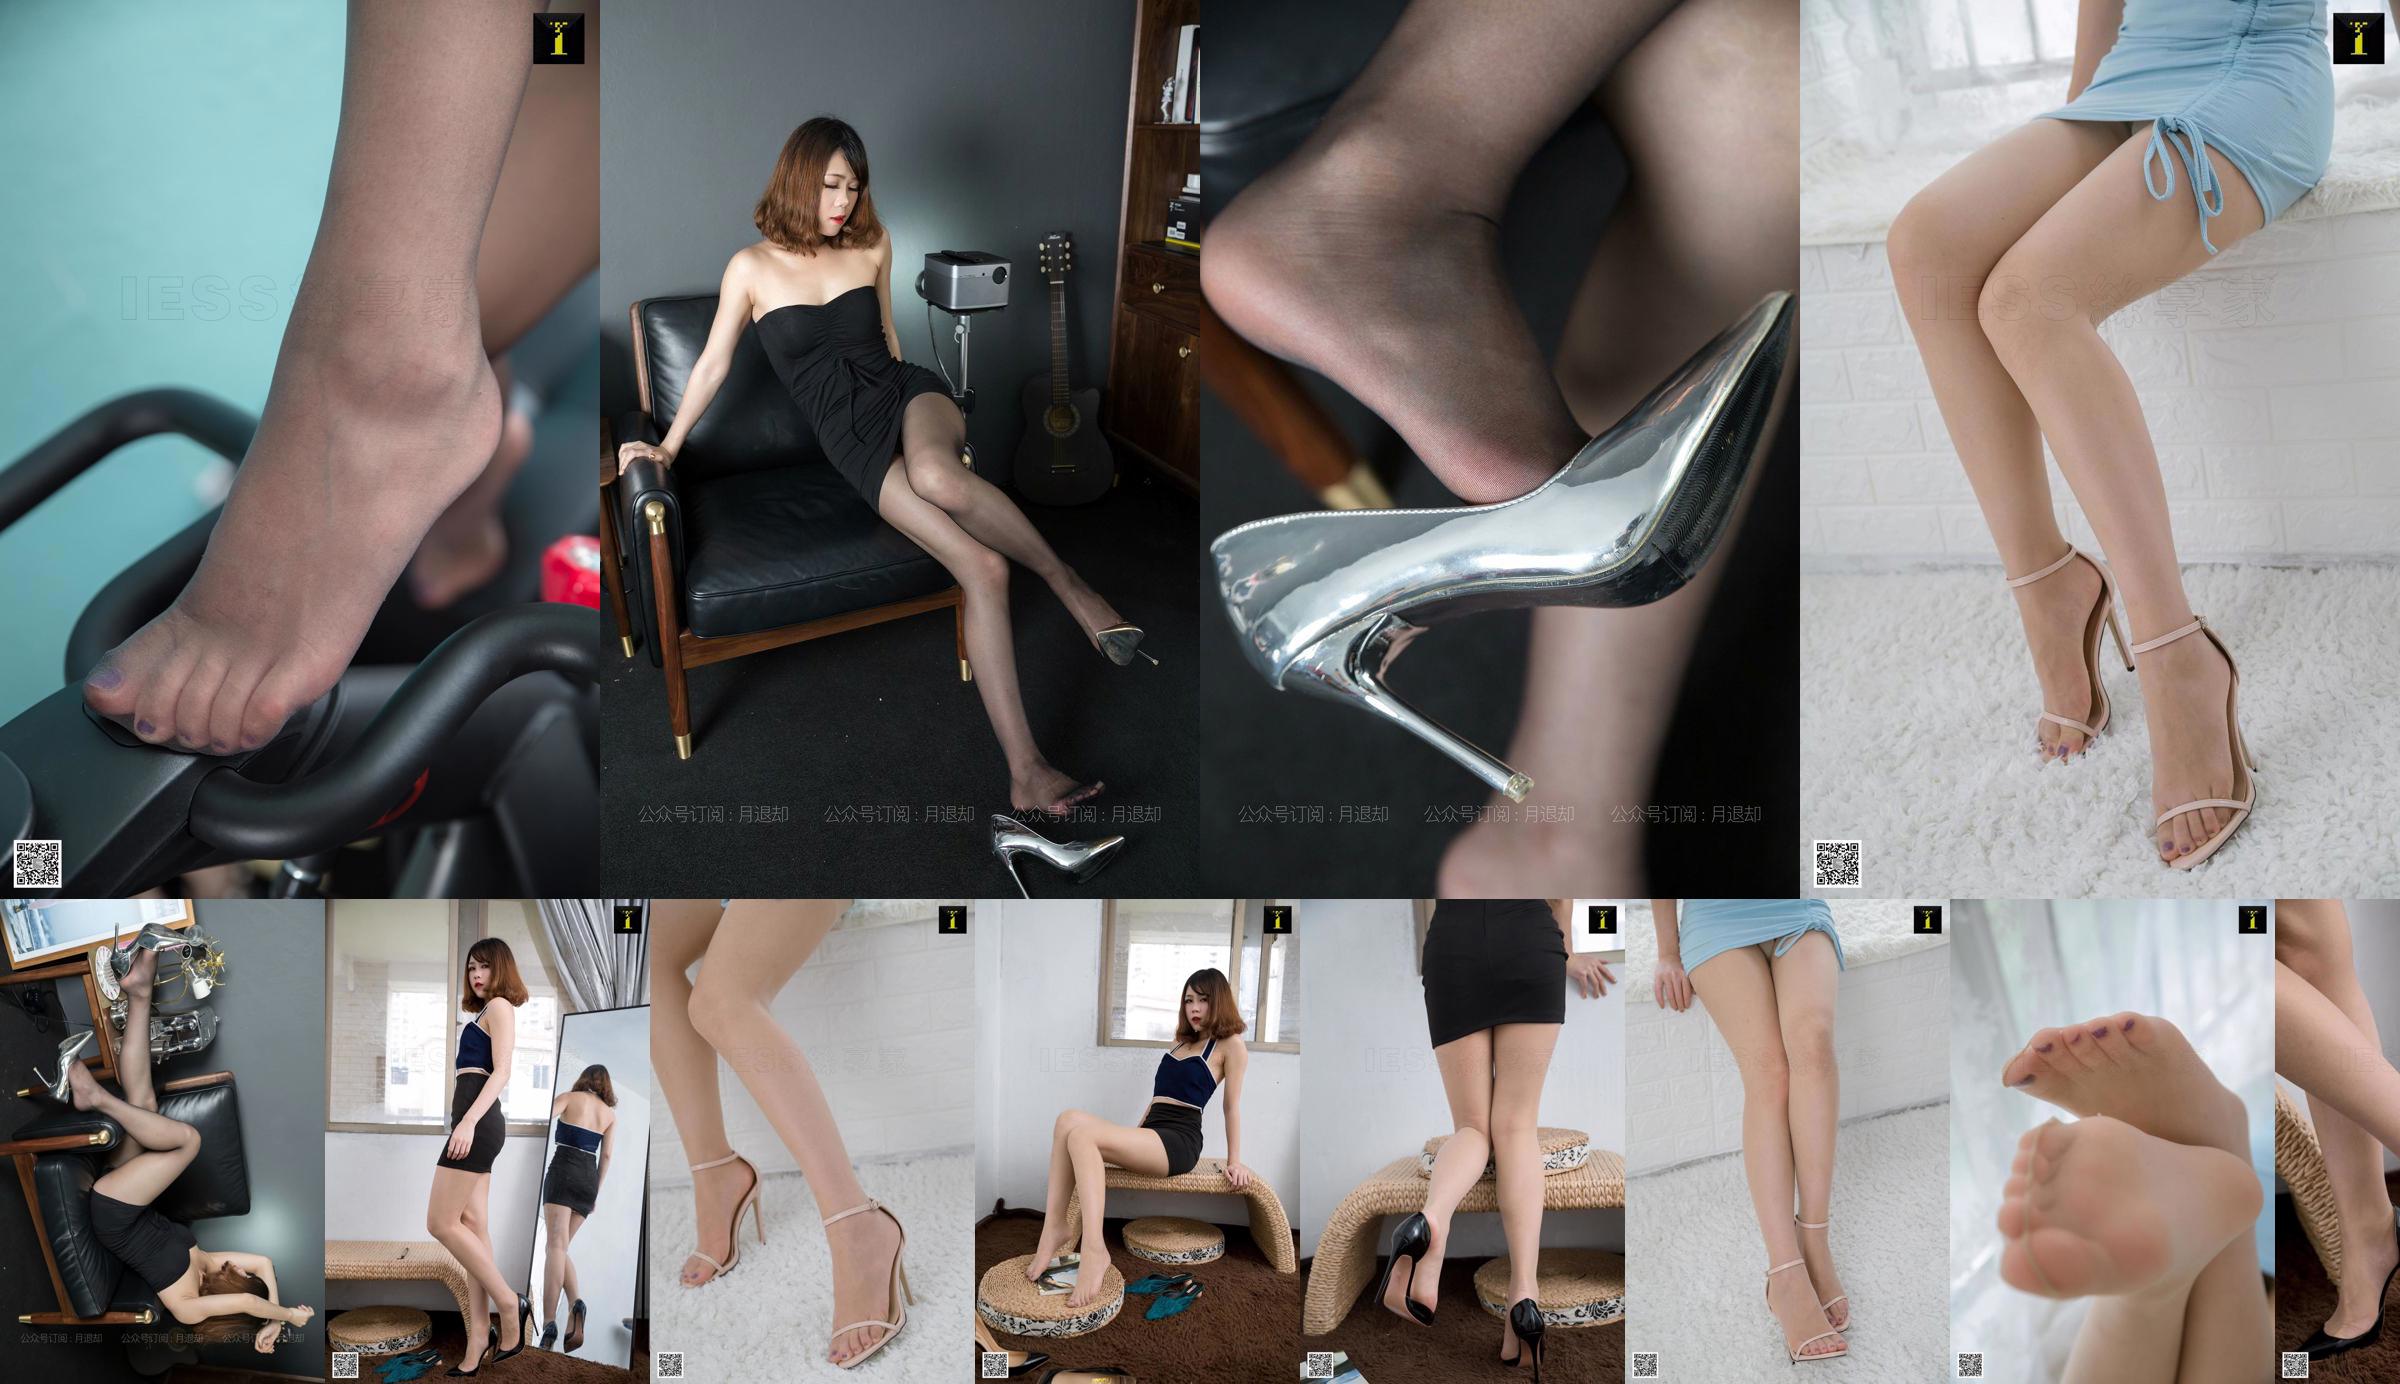 Model Diudiu "The Magic of Super Shallow Mouth and High Heels" [IESS Weixiang] Beautiful legs in stockings No.6128cf Page 1